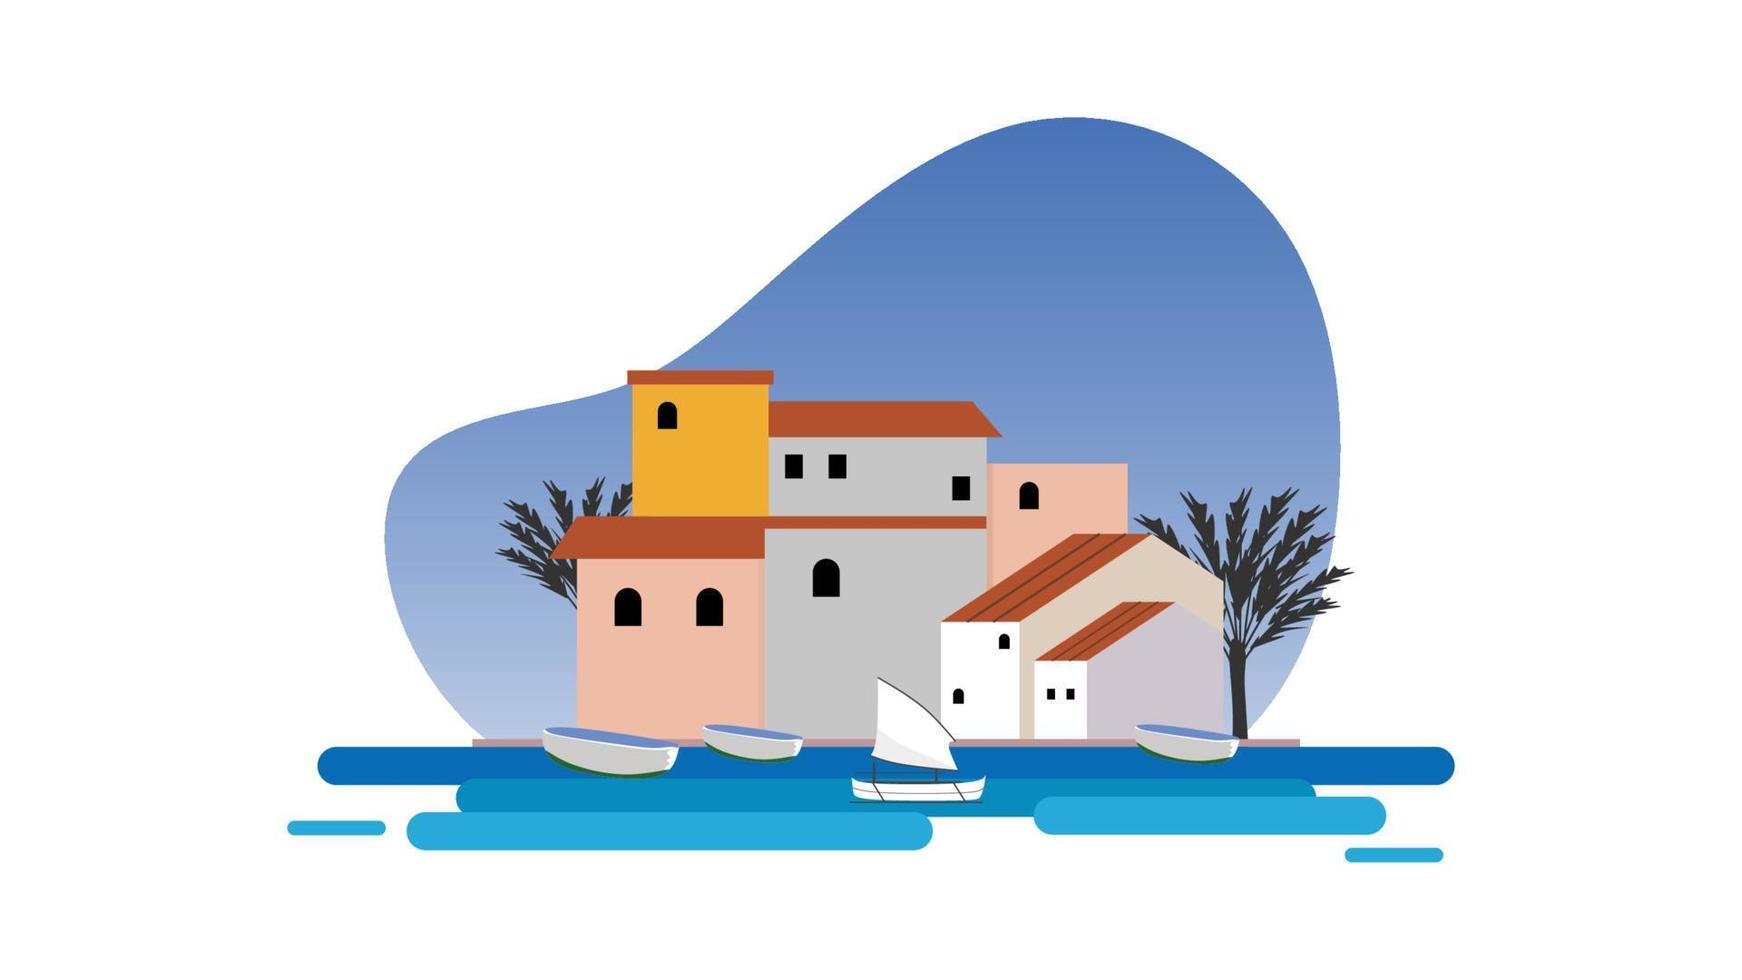 Spanish Coastal Architecture and Boats in Vector Illustration